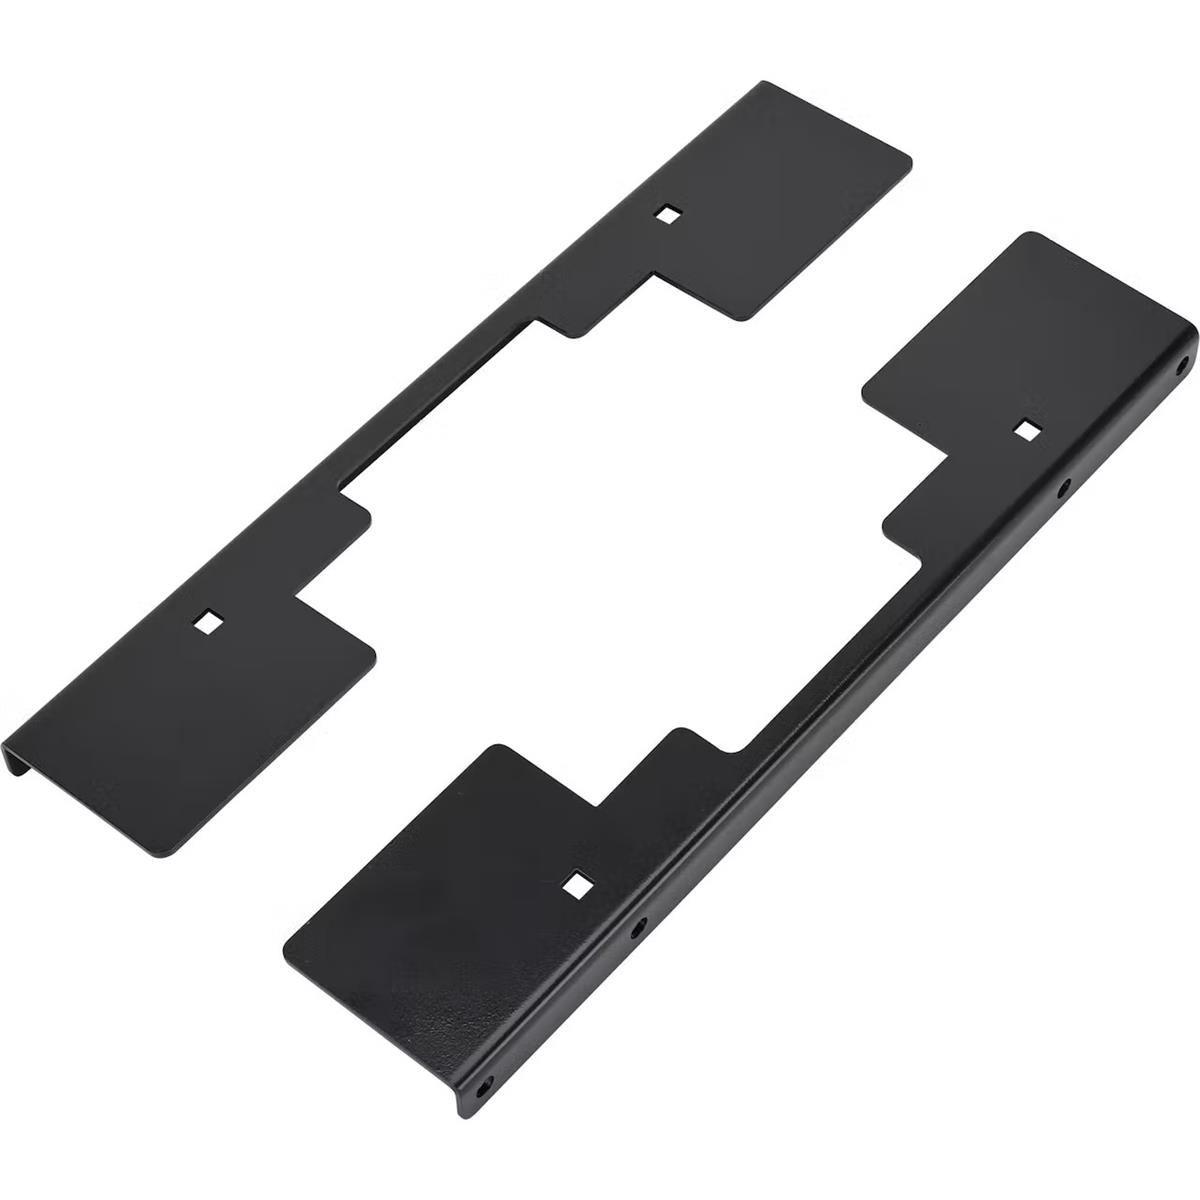 COM-5753 | COM-5753 Universal Seat Mounting Frame with Slider and Mounts Common Application23.jpg